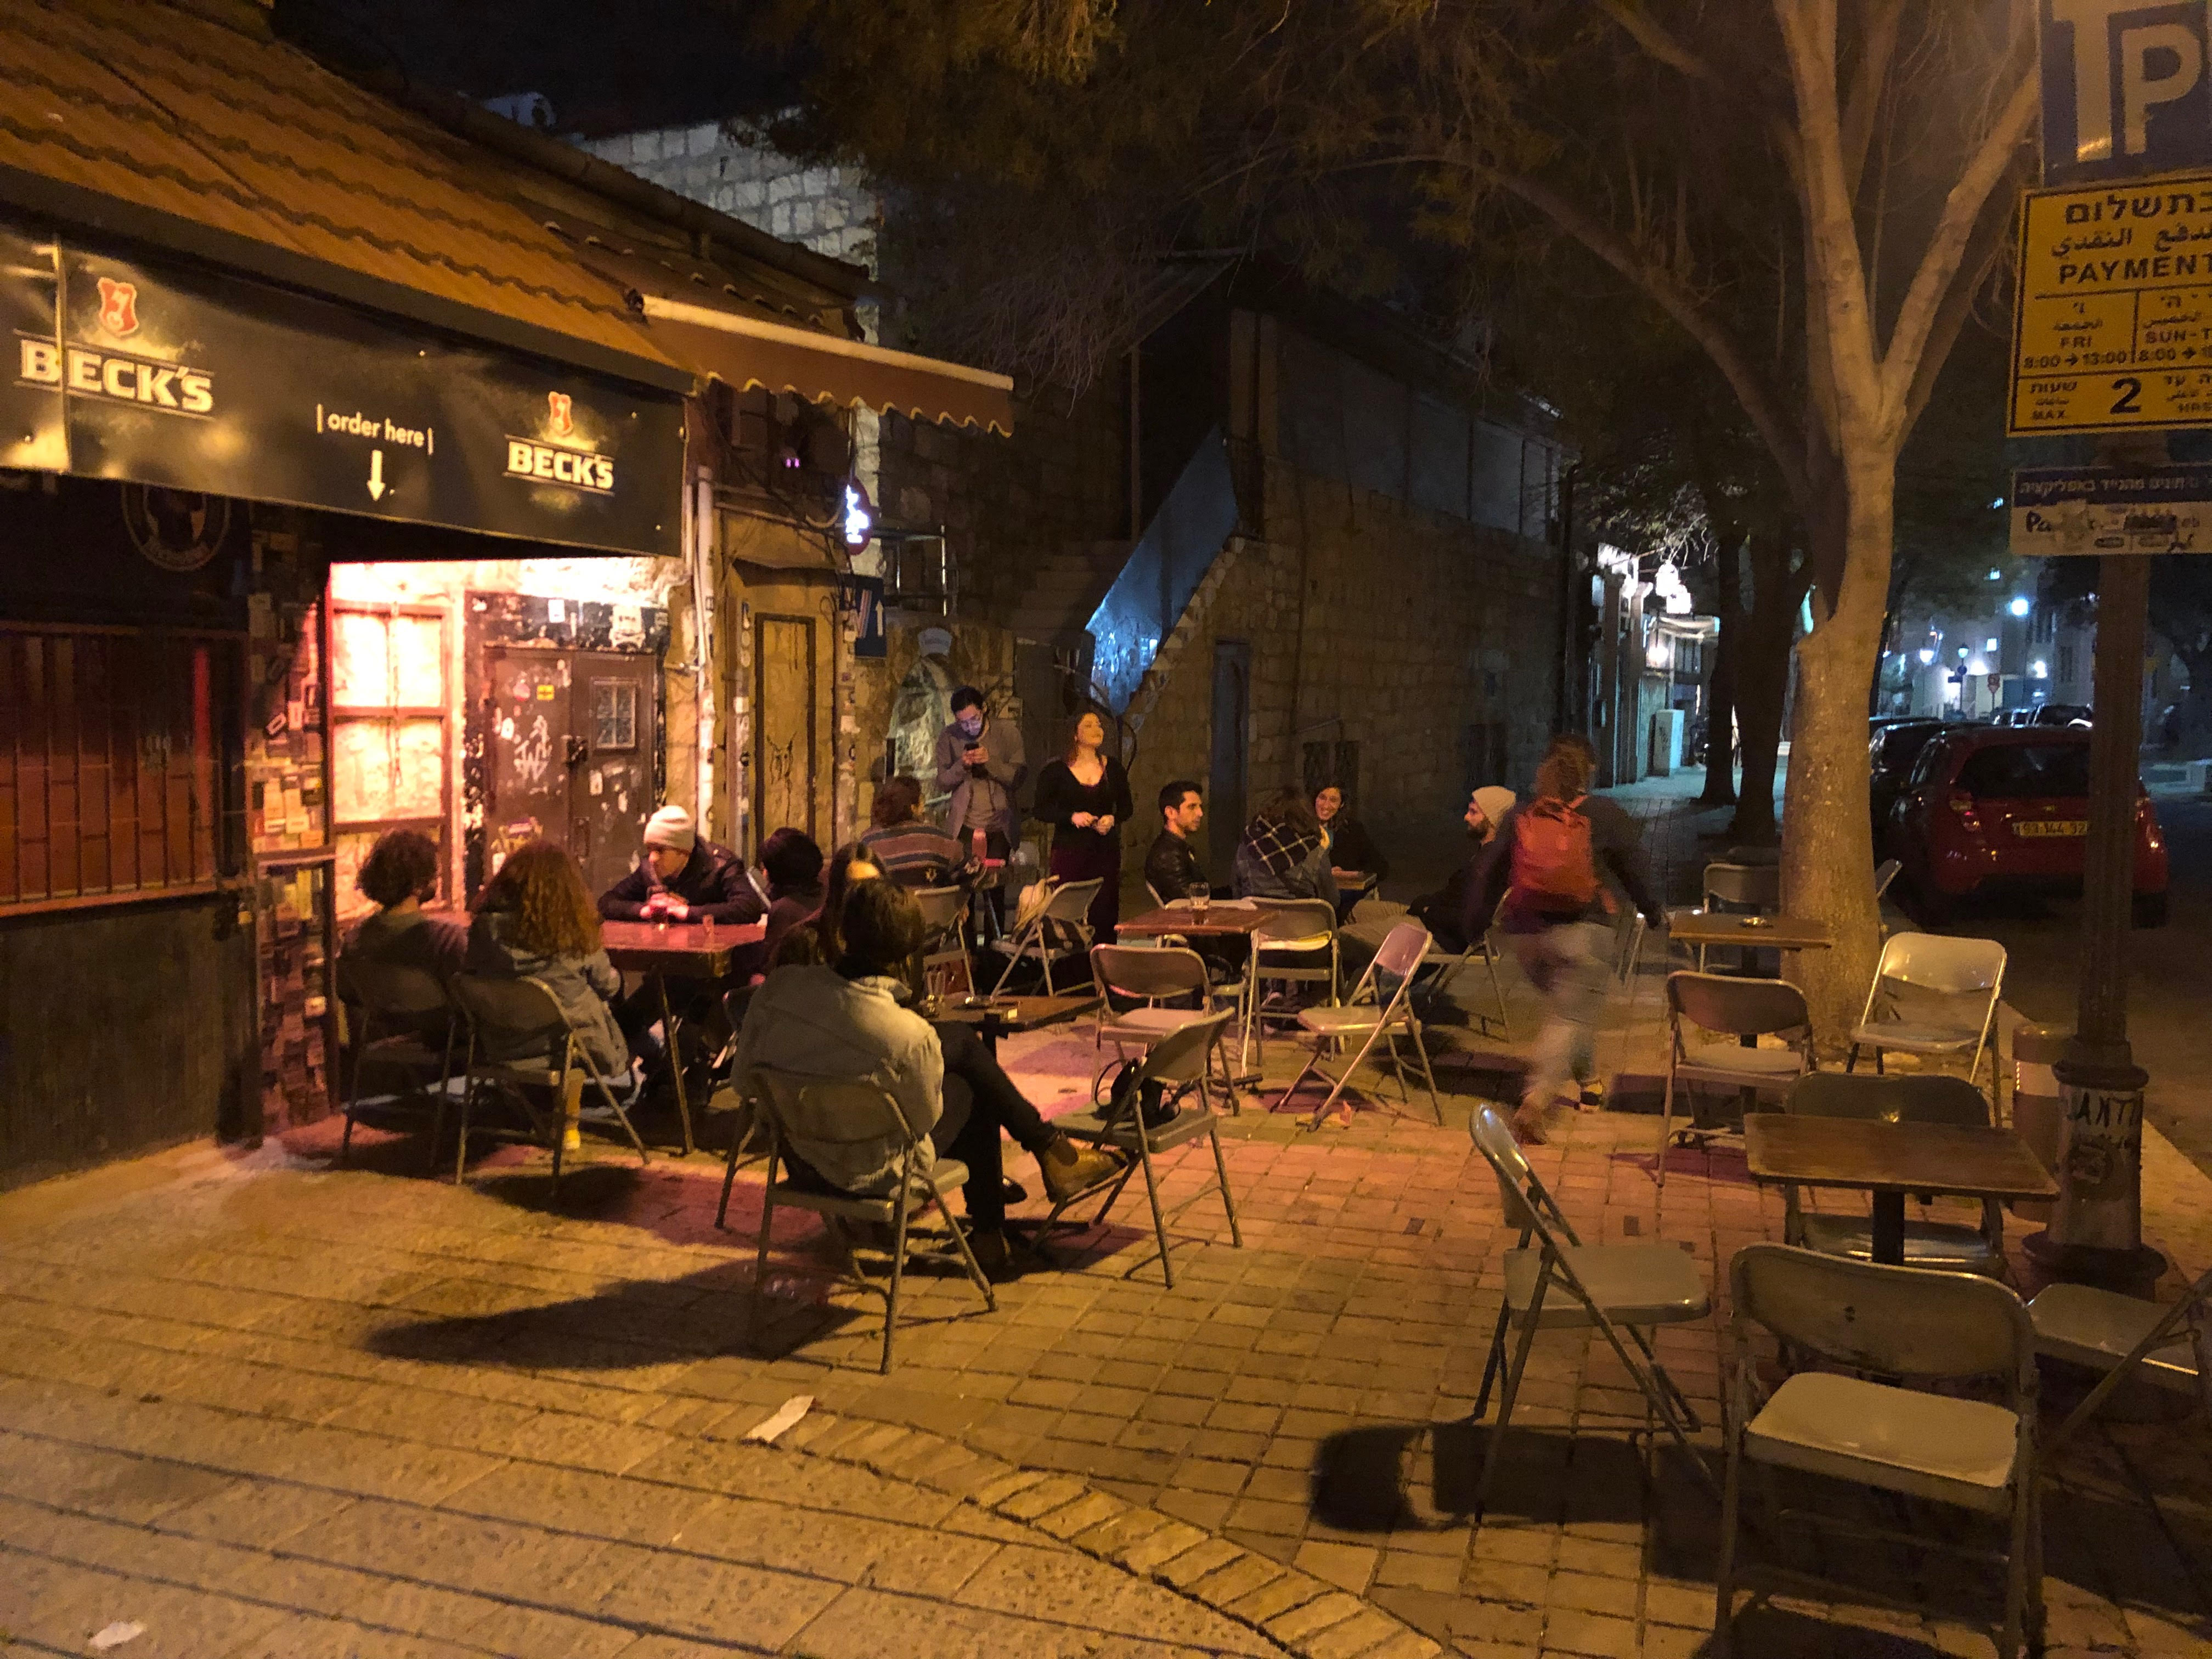 The patio in front of the complex is a popular site for club-goes to drink, smoke and enjoy the mild Jerusalem spring evening.